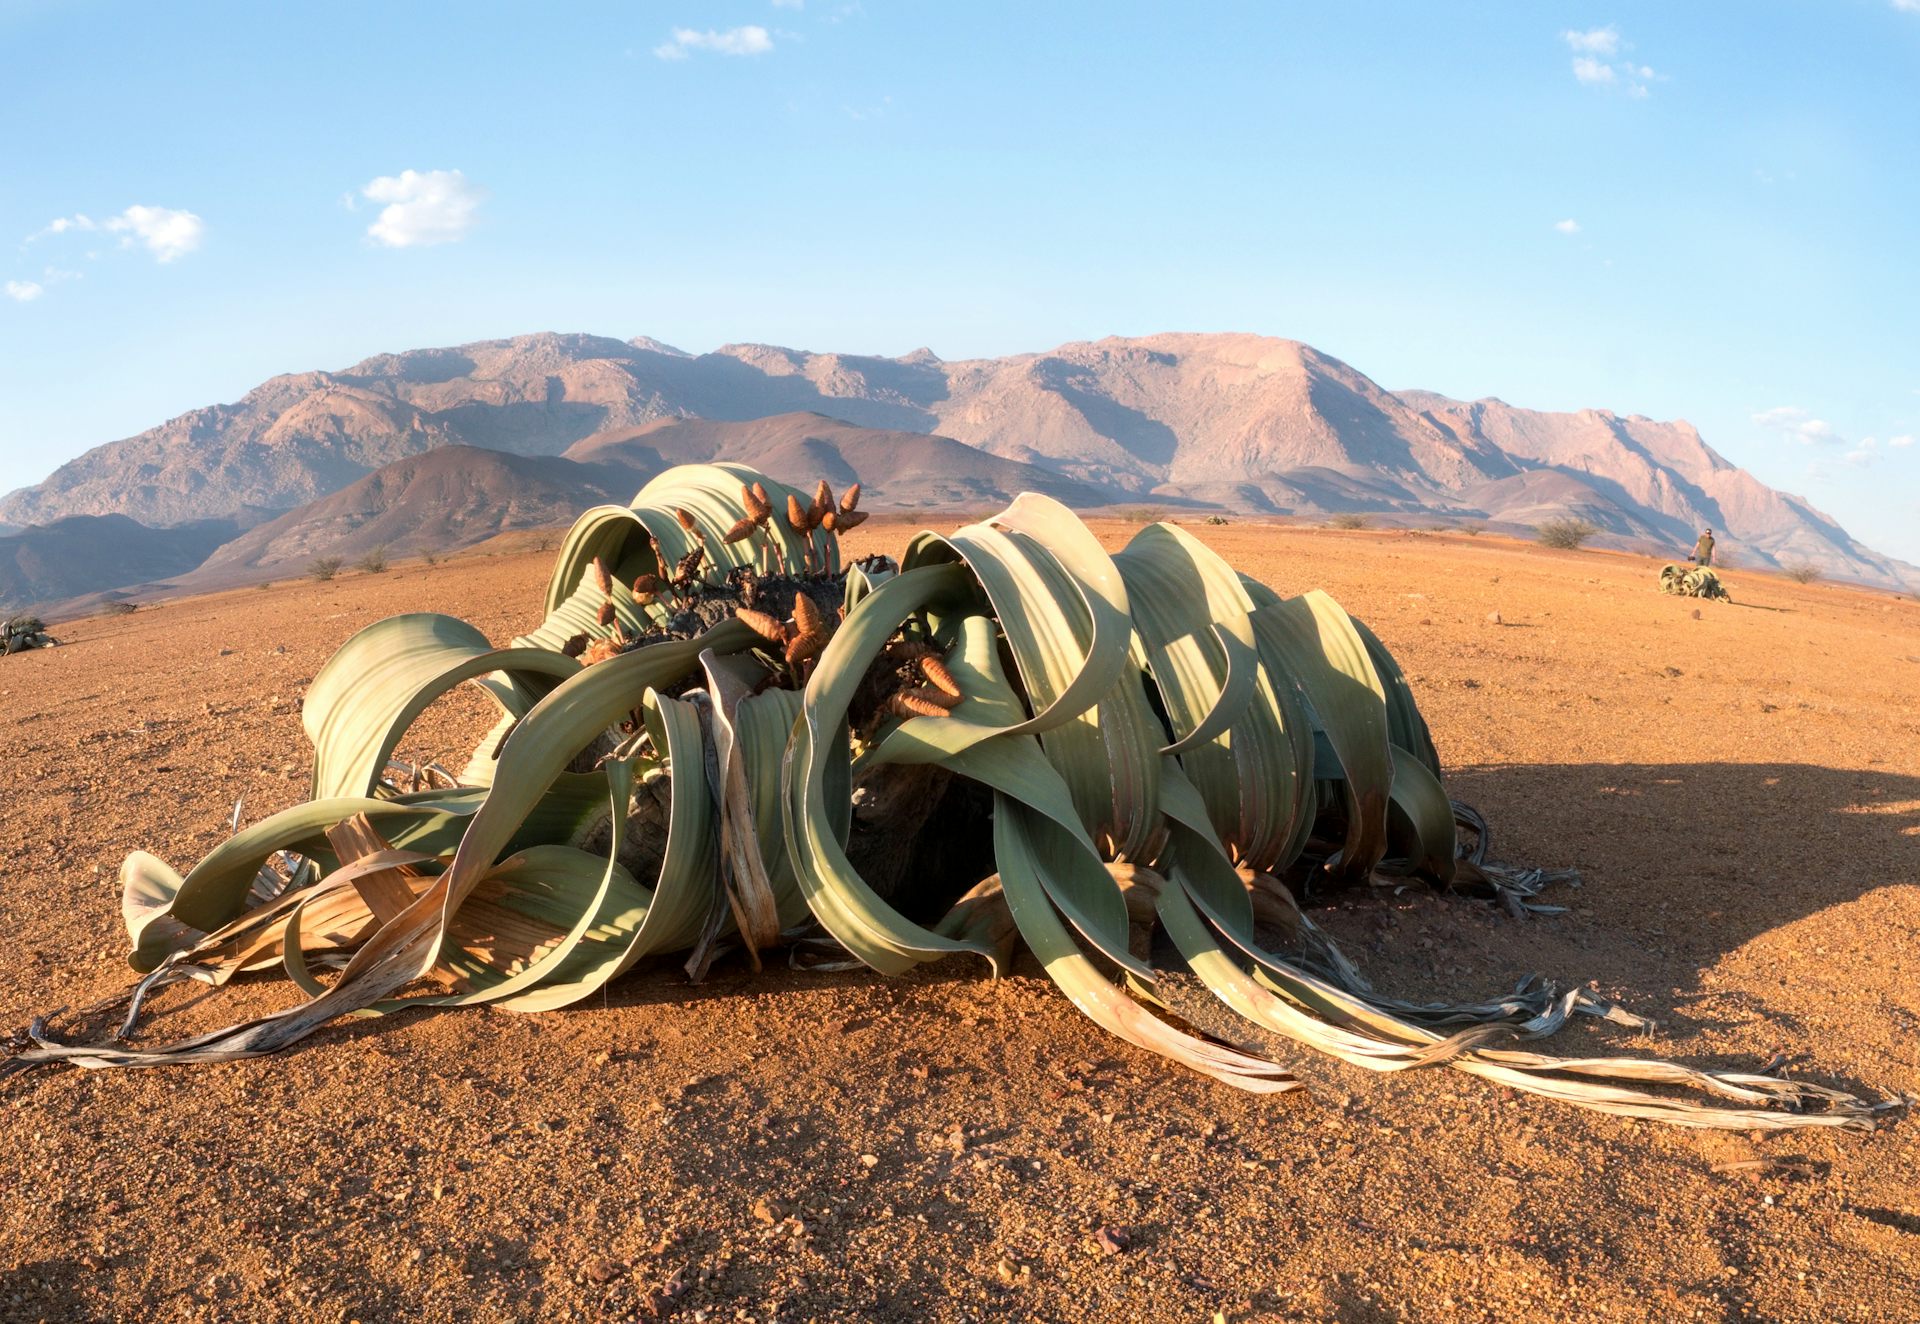 Welwitschia mirabilis, a type of non-flowering seed plant, in the Namibian desert. (Shutterstock)